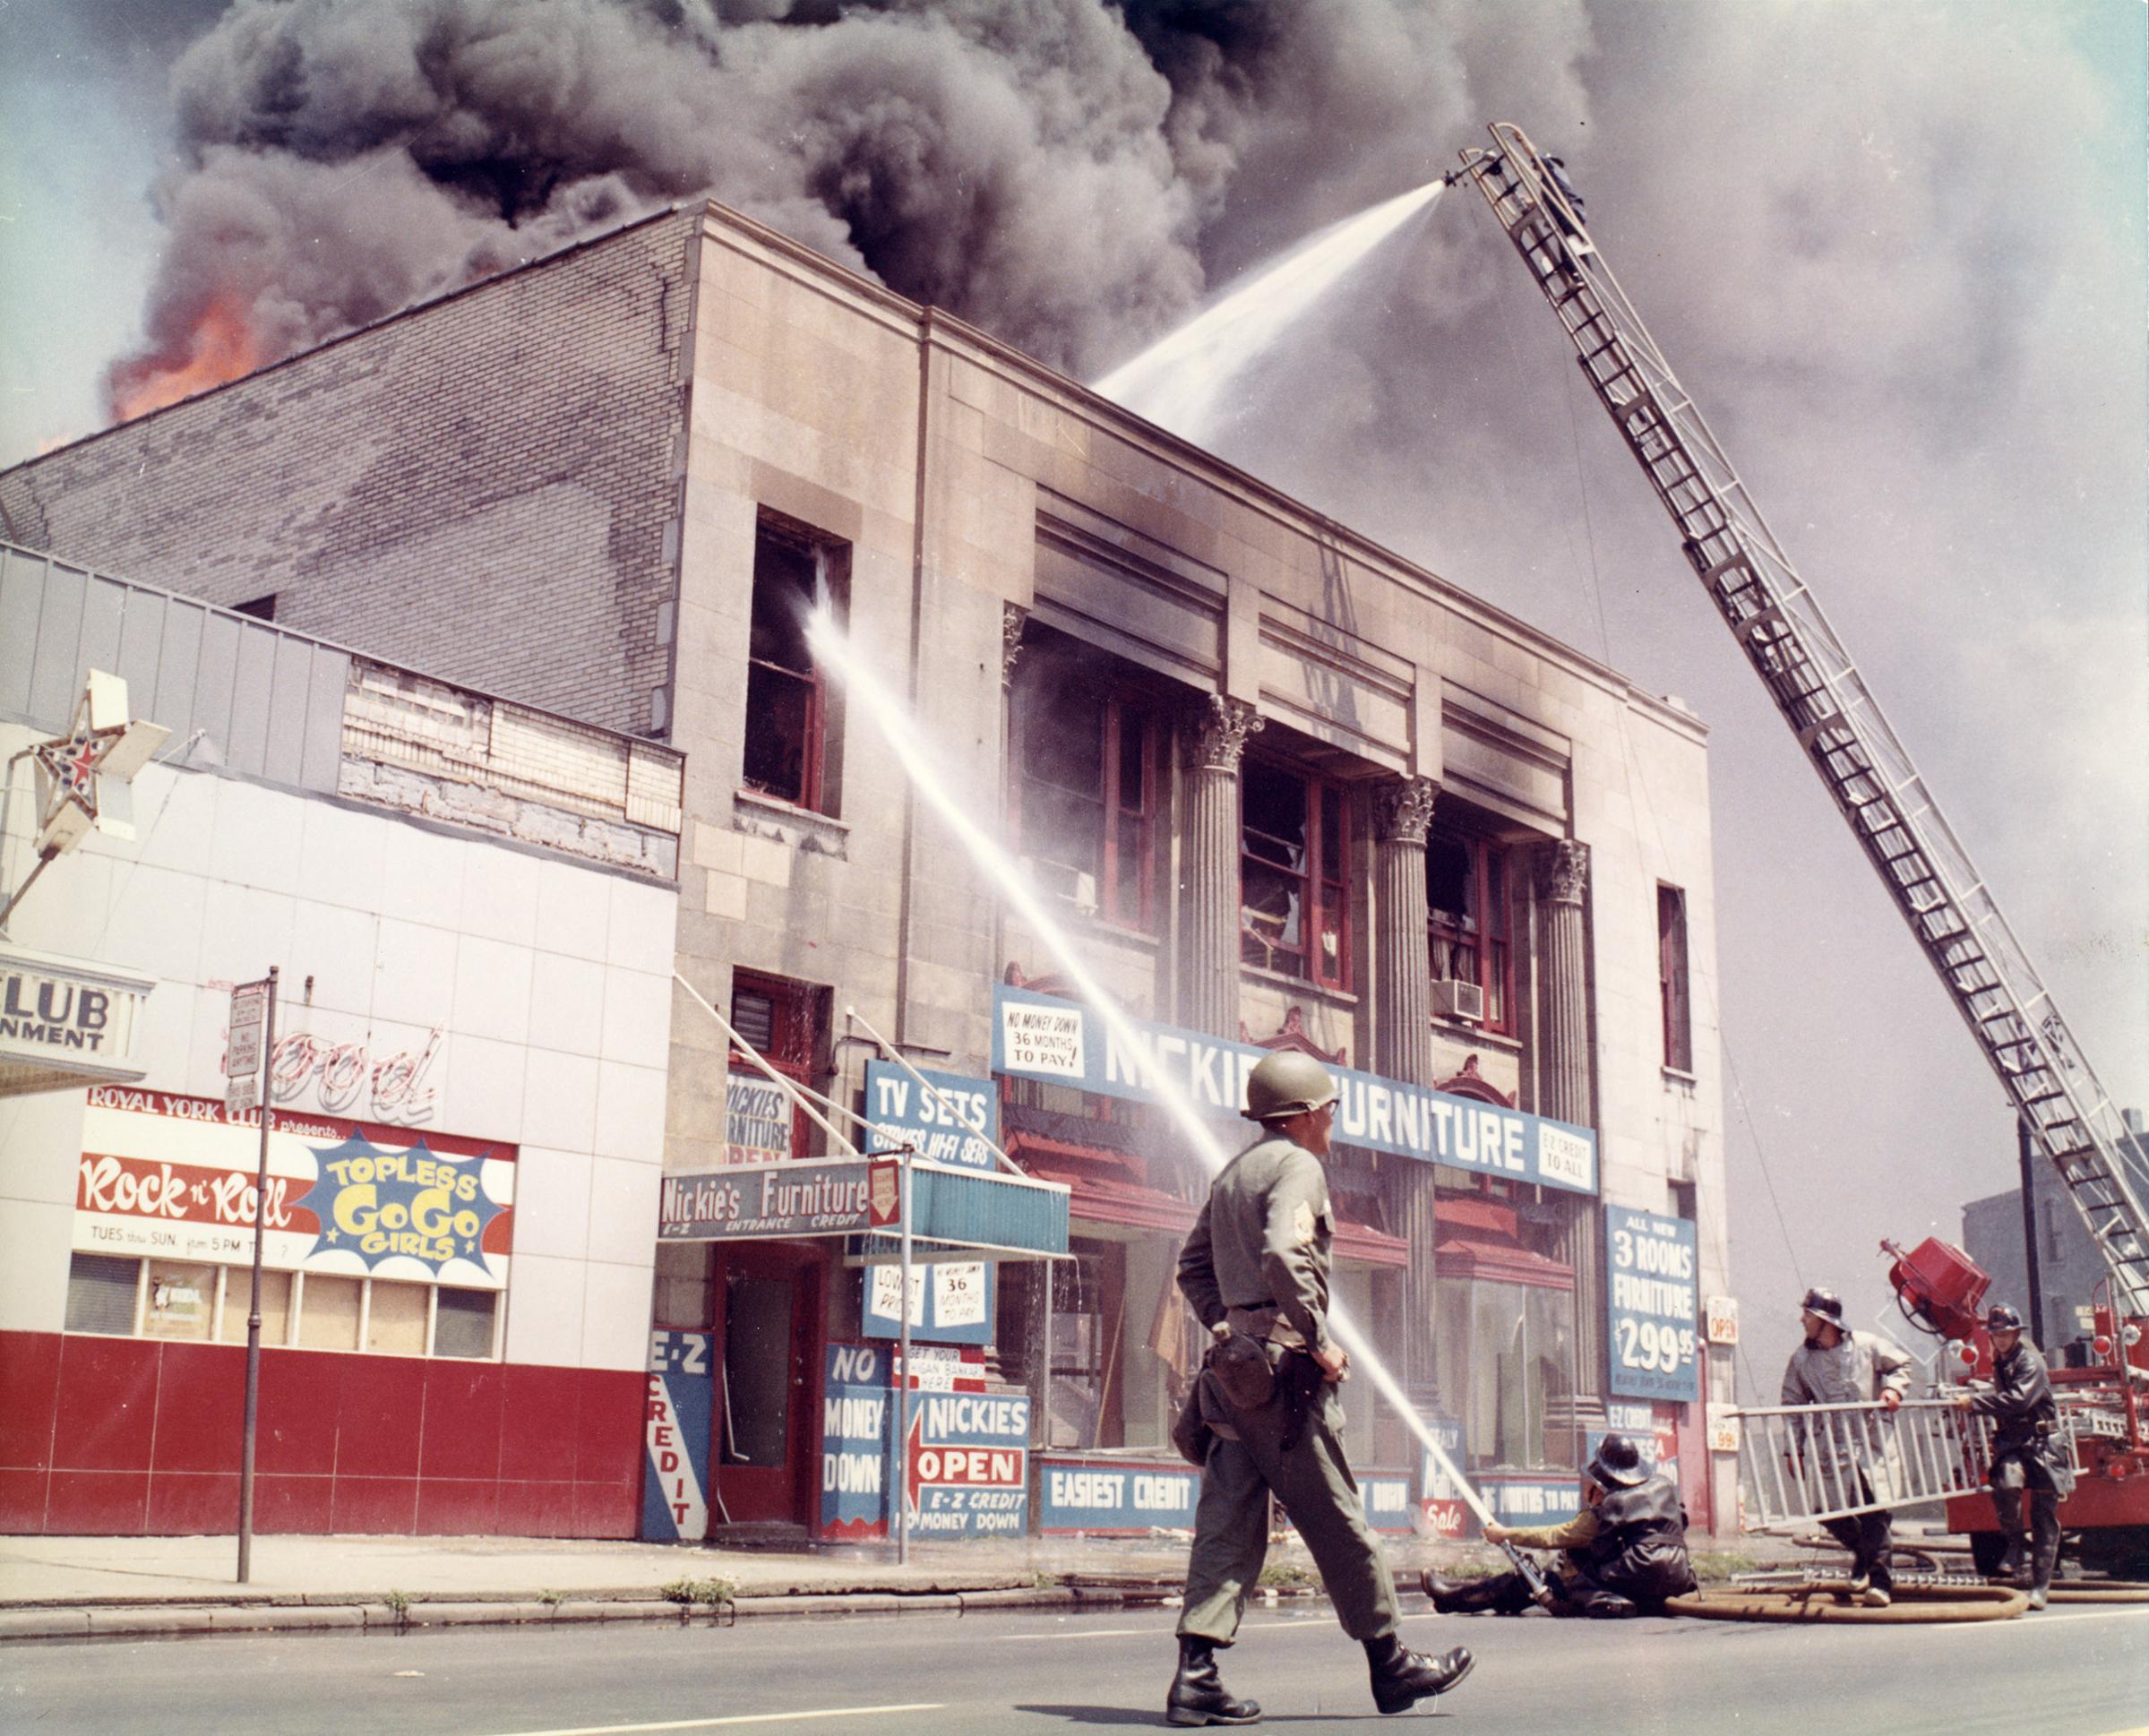 A U.S. Army soldier patrols the streets as Detroit firefighters suppress flames that have broken through the rooftop of a neighborhood furniture store.